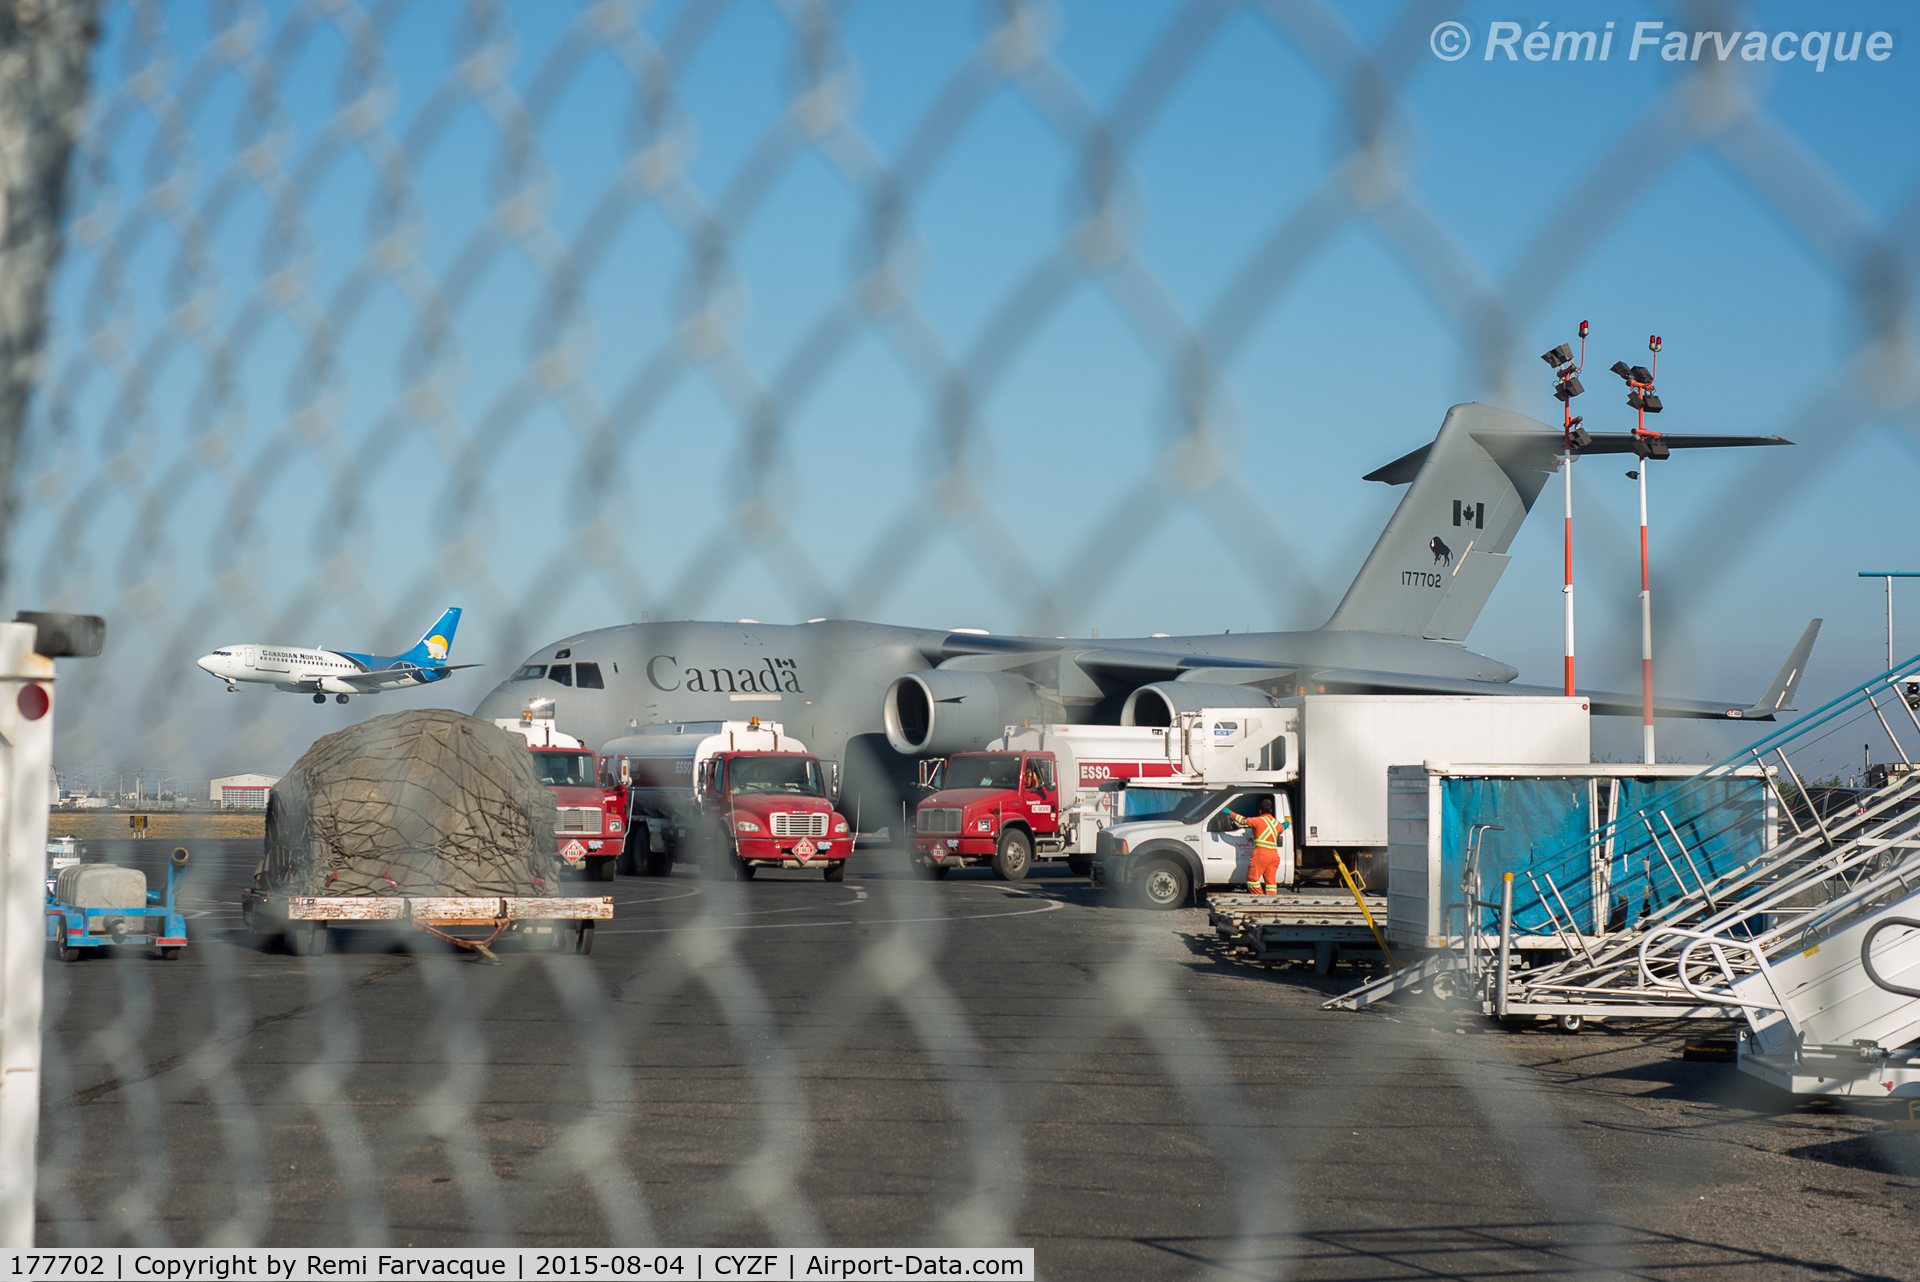 177702, 2007 Boeing CC-177 Globemaster III C/N F-180, Being loaded up & refuelling, just after 0900h.